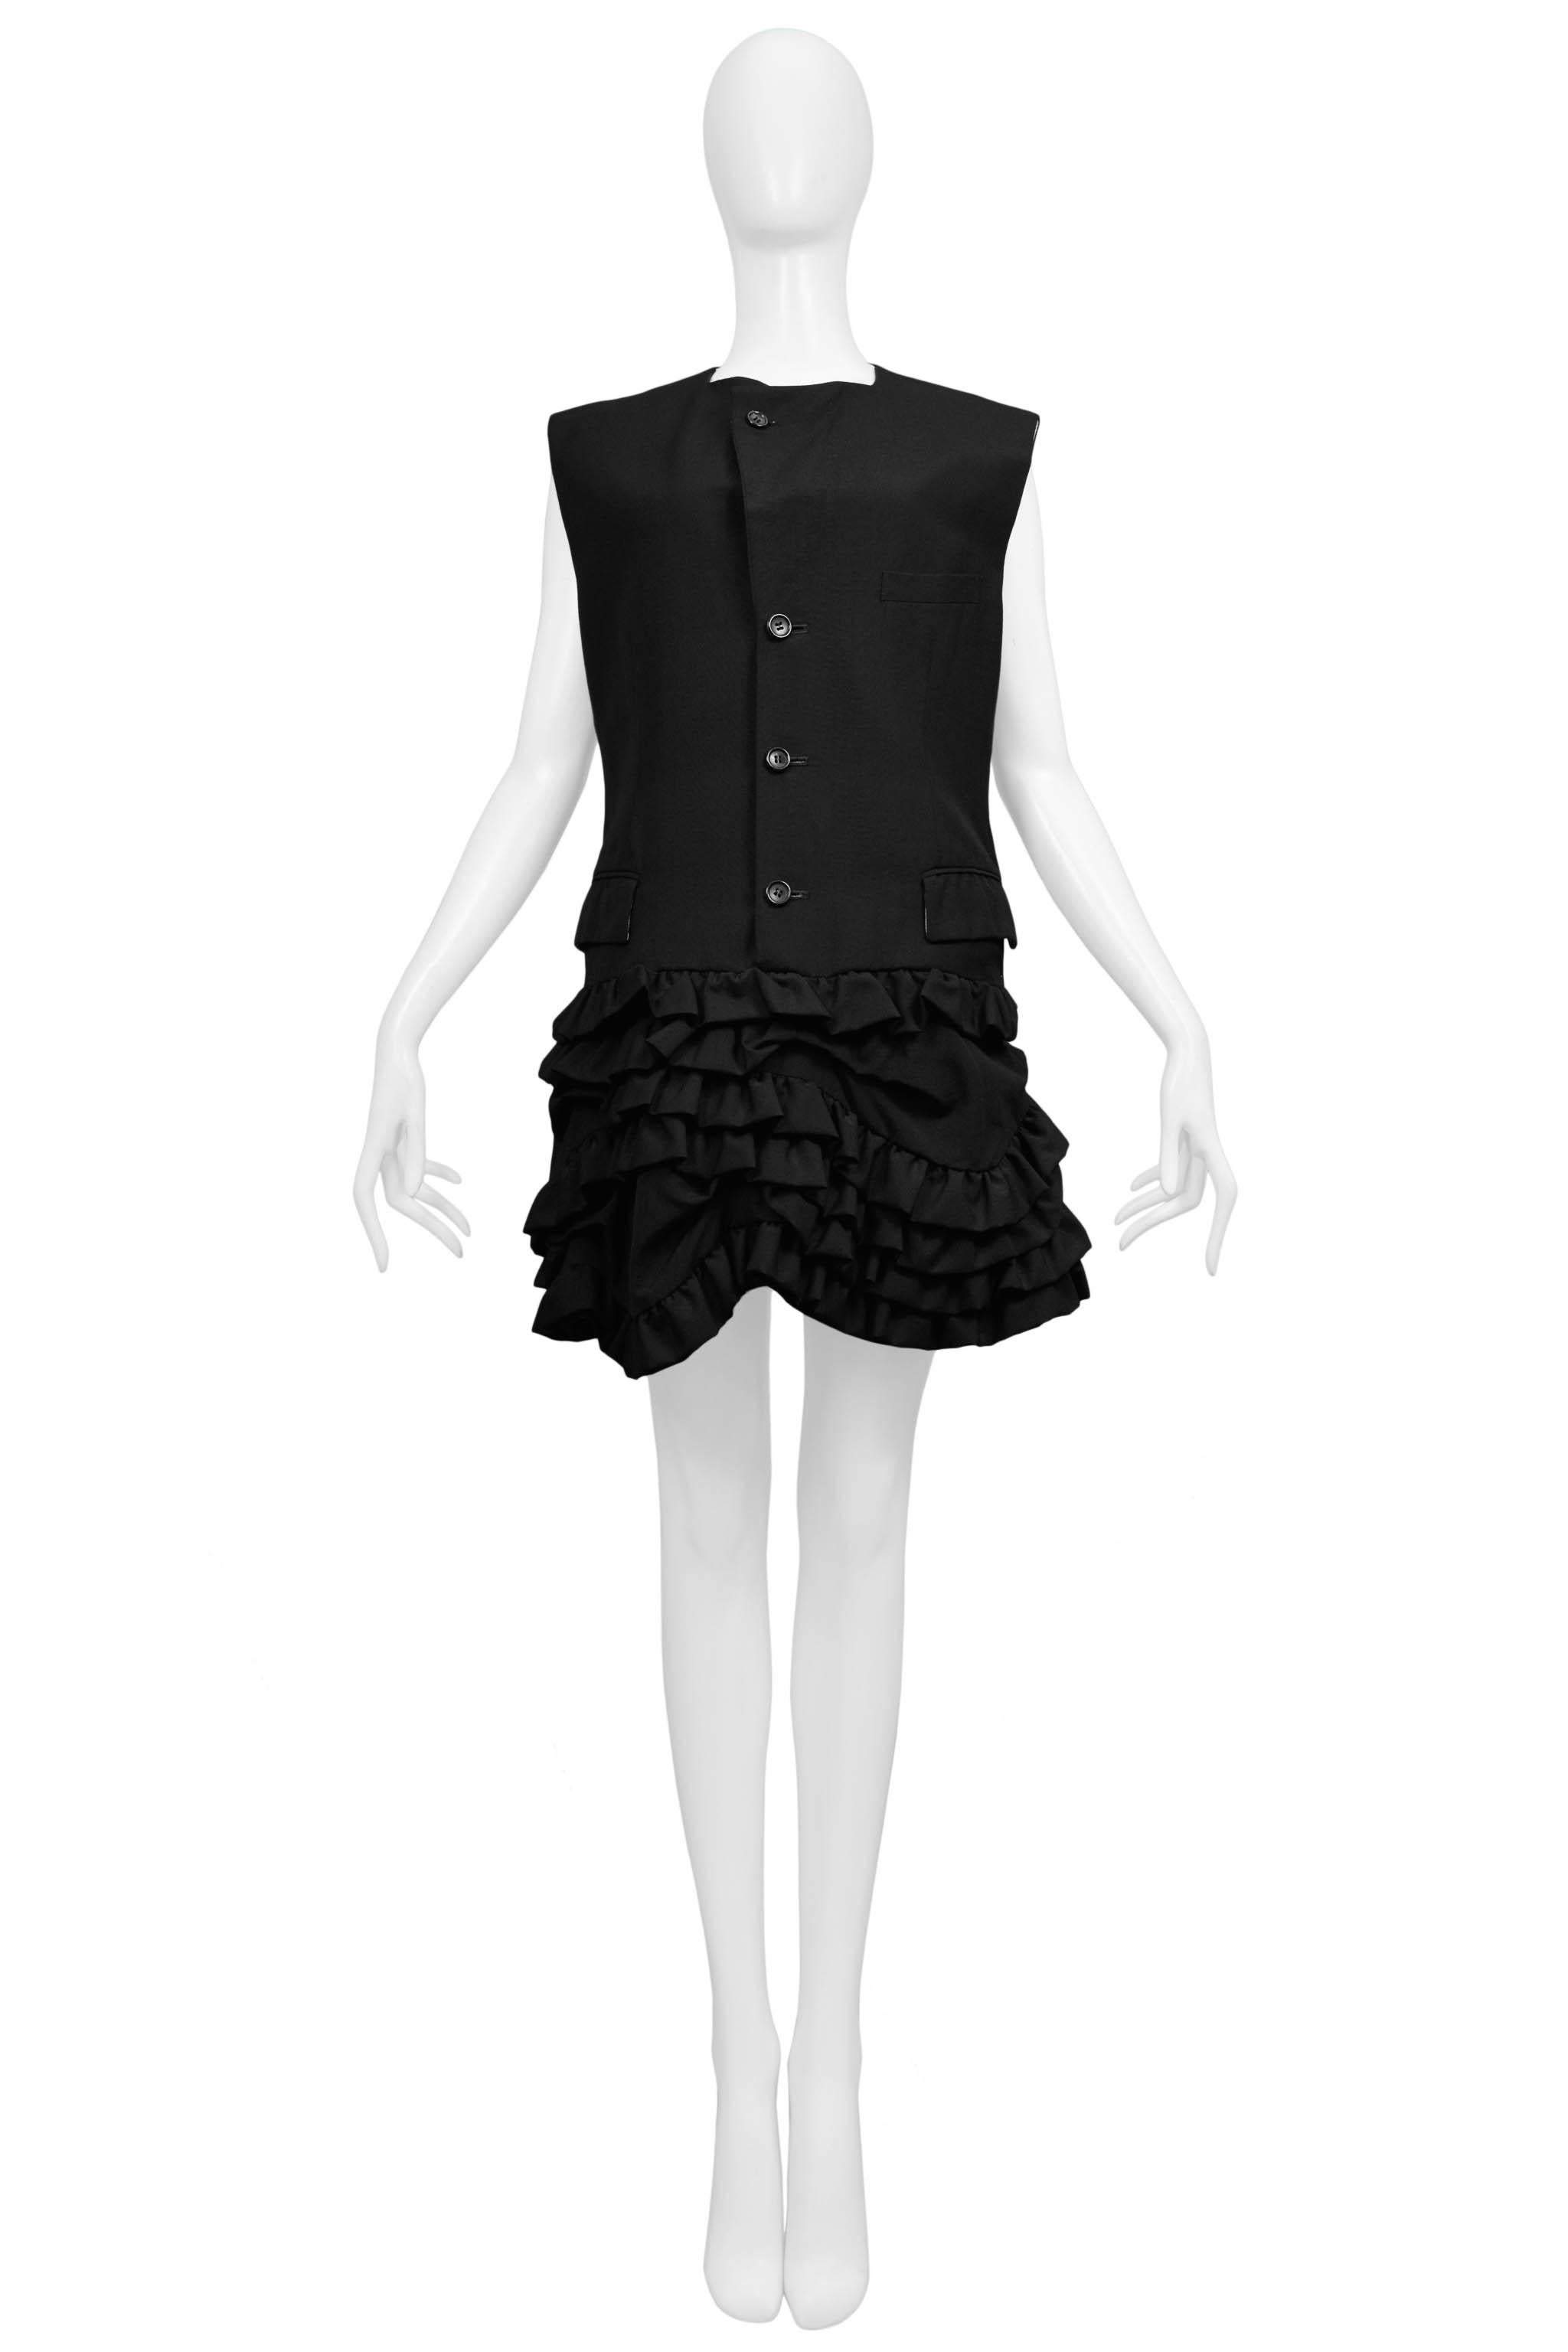 Resurrection Vintage is excited to offer a vintage Comme des Garcons black wool vest dress featuring a button front, strong shoulders, and ruffle skirt. 

Comme Des Garcons
Size Small
1994 Collection
Wool
Excellent Vintage Condition  